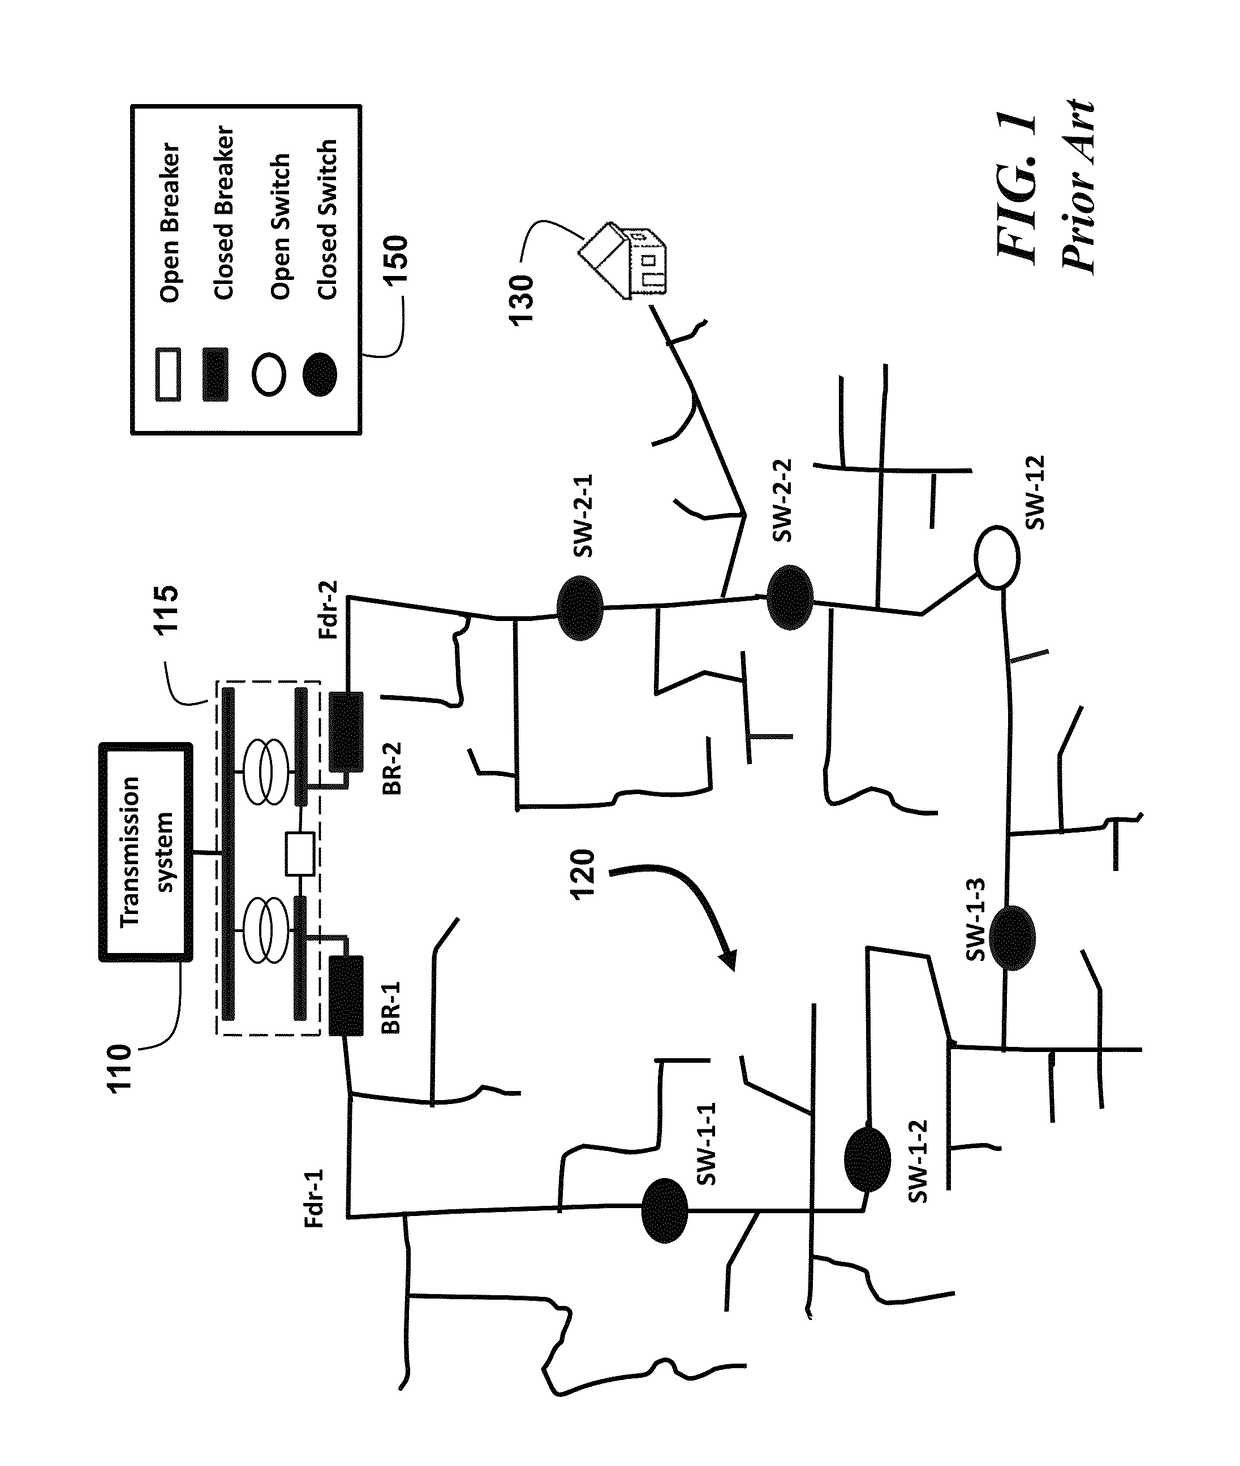 Dynamic and adaptive configurable power distribution system